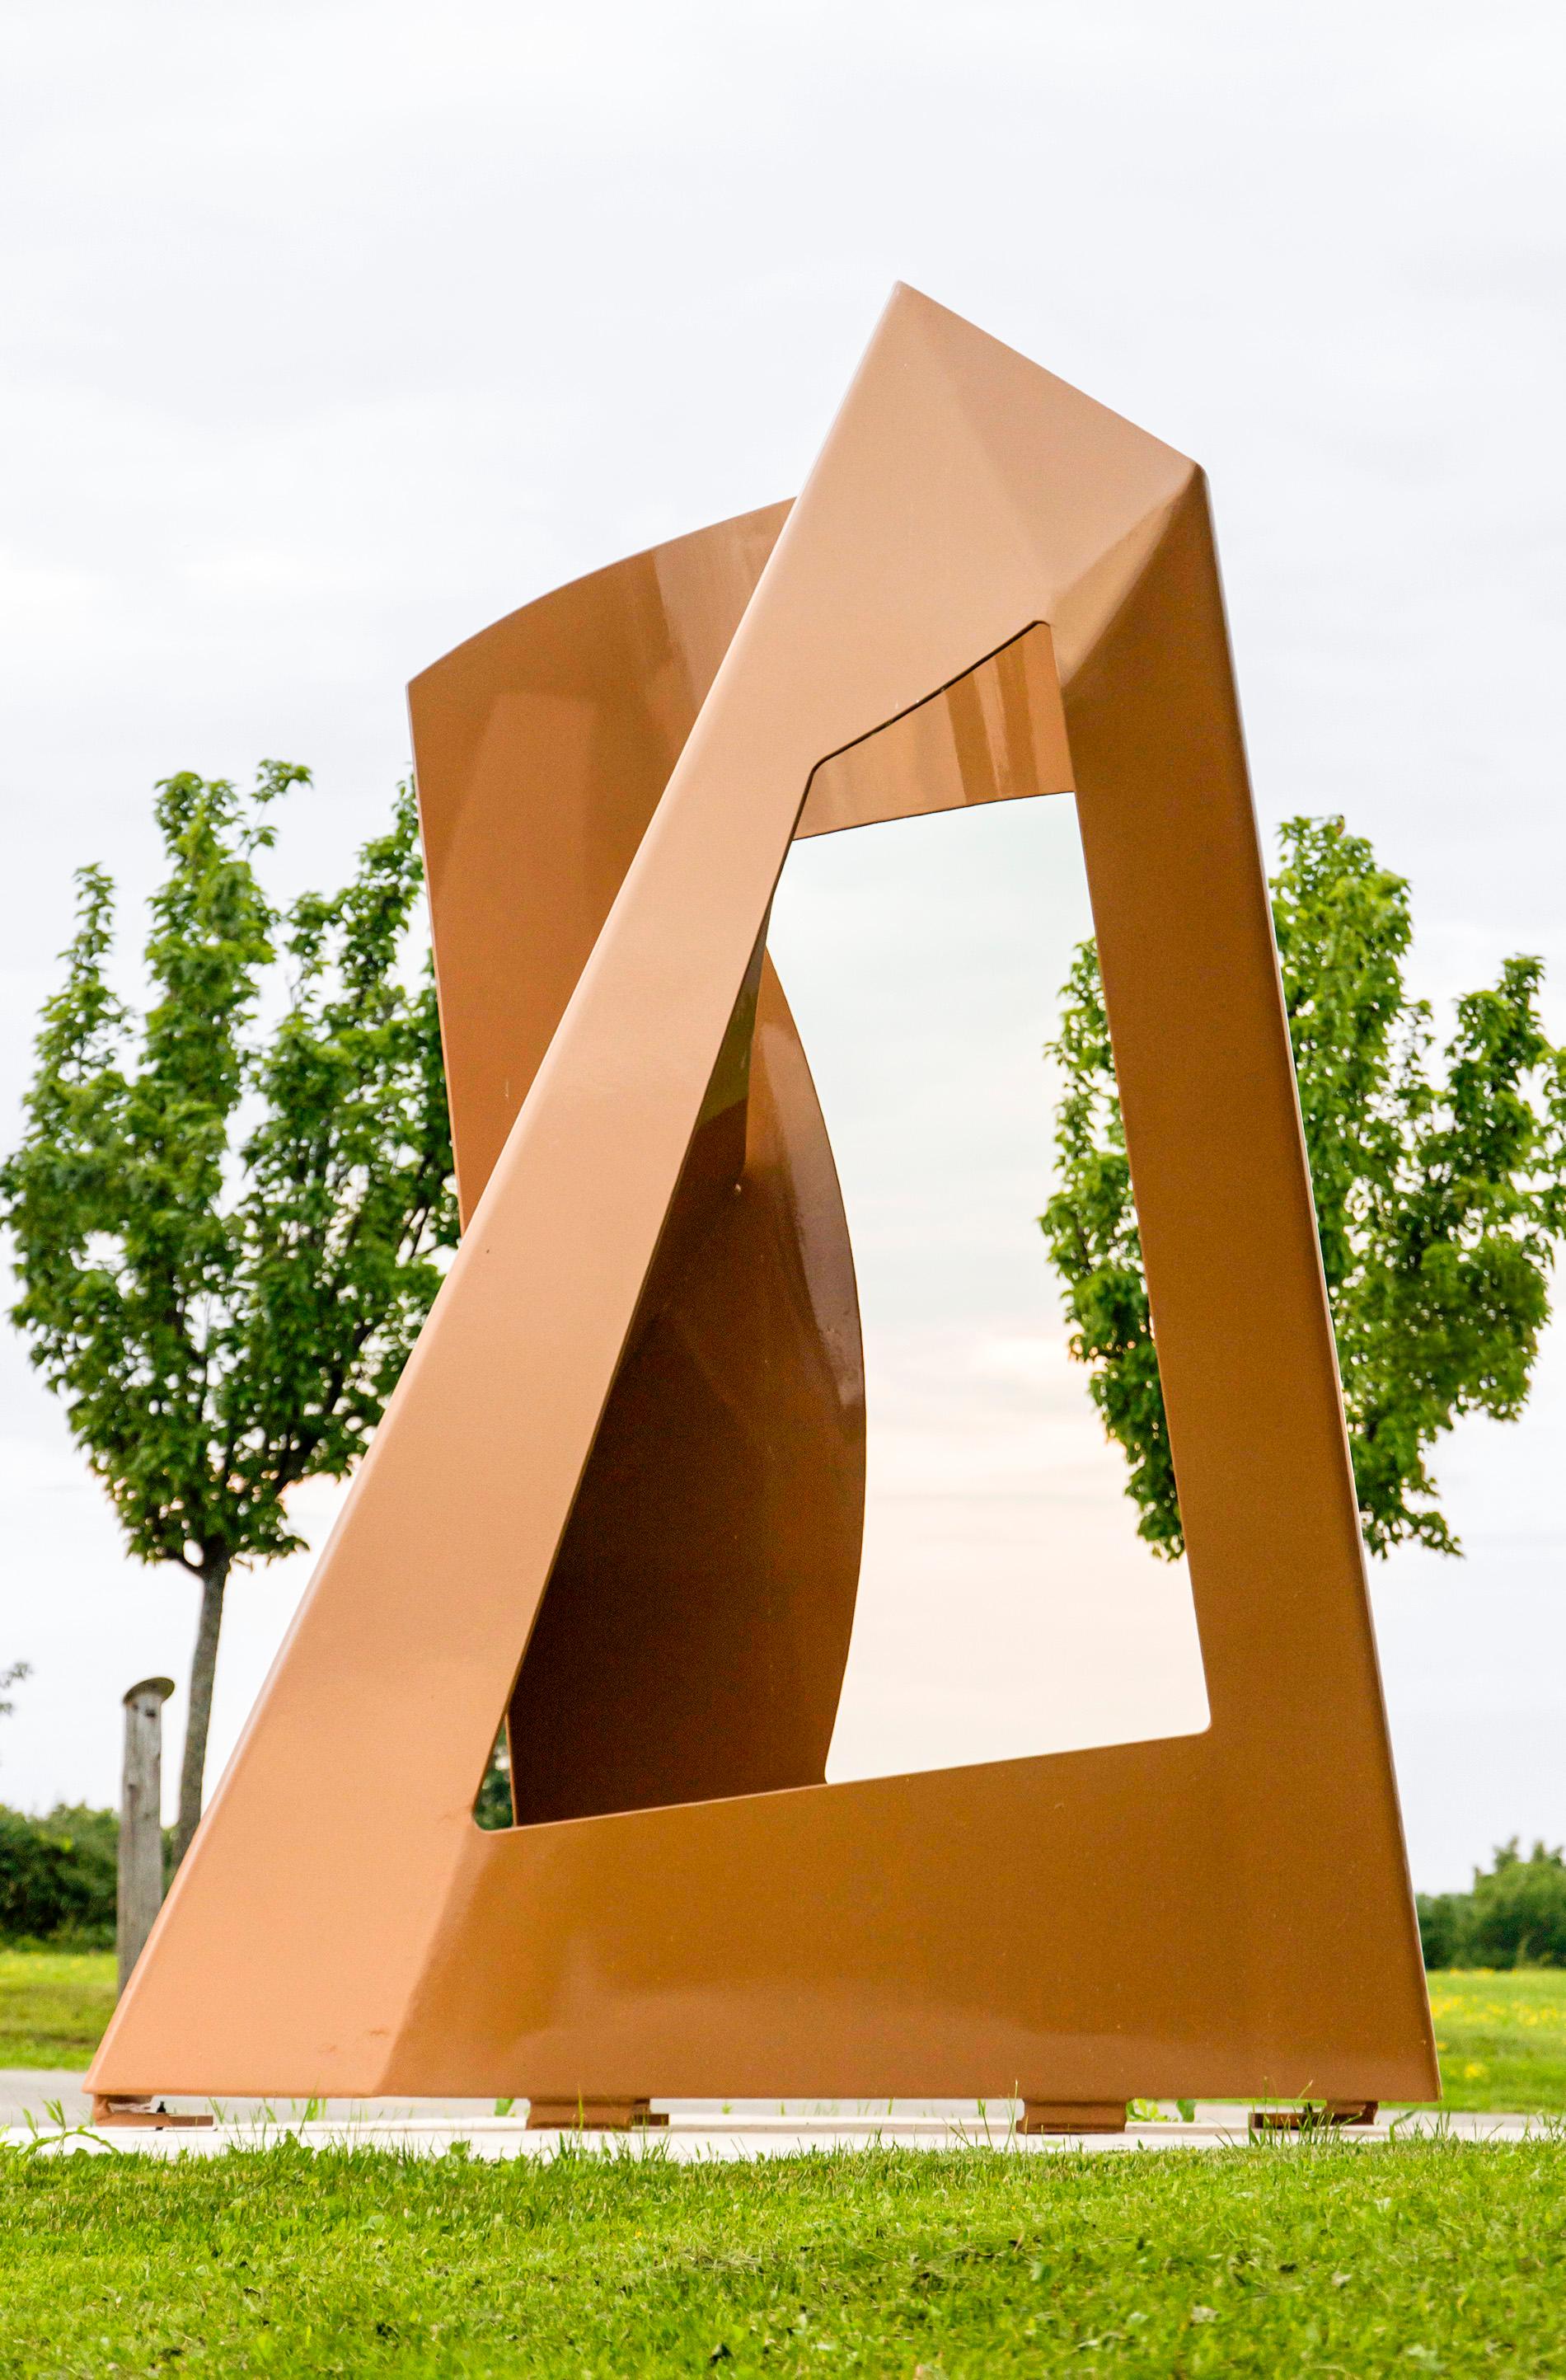 Dream Screens (Paravents du Reve) - large, abstract, outdoor steel sculpture - Contemporary Sculpture by Marcel Barbeau RCA